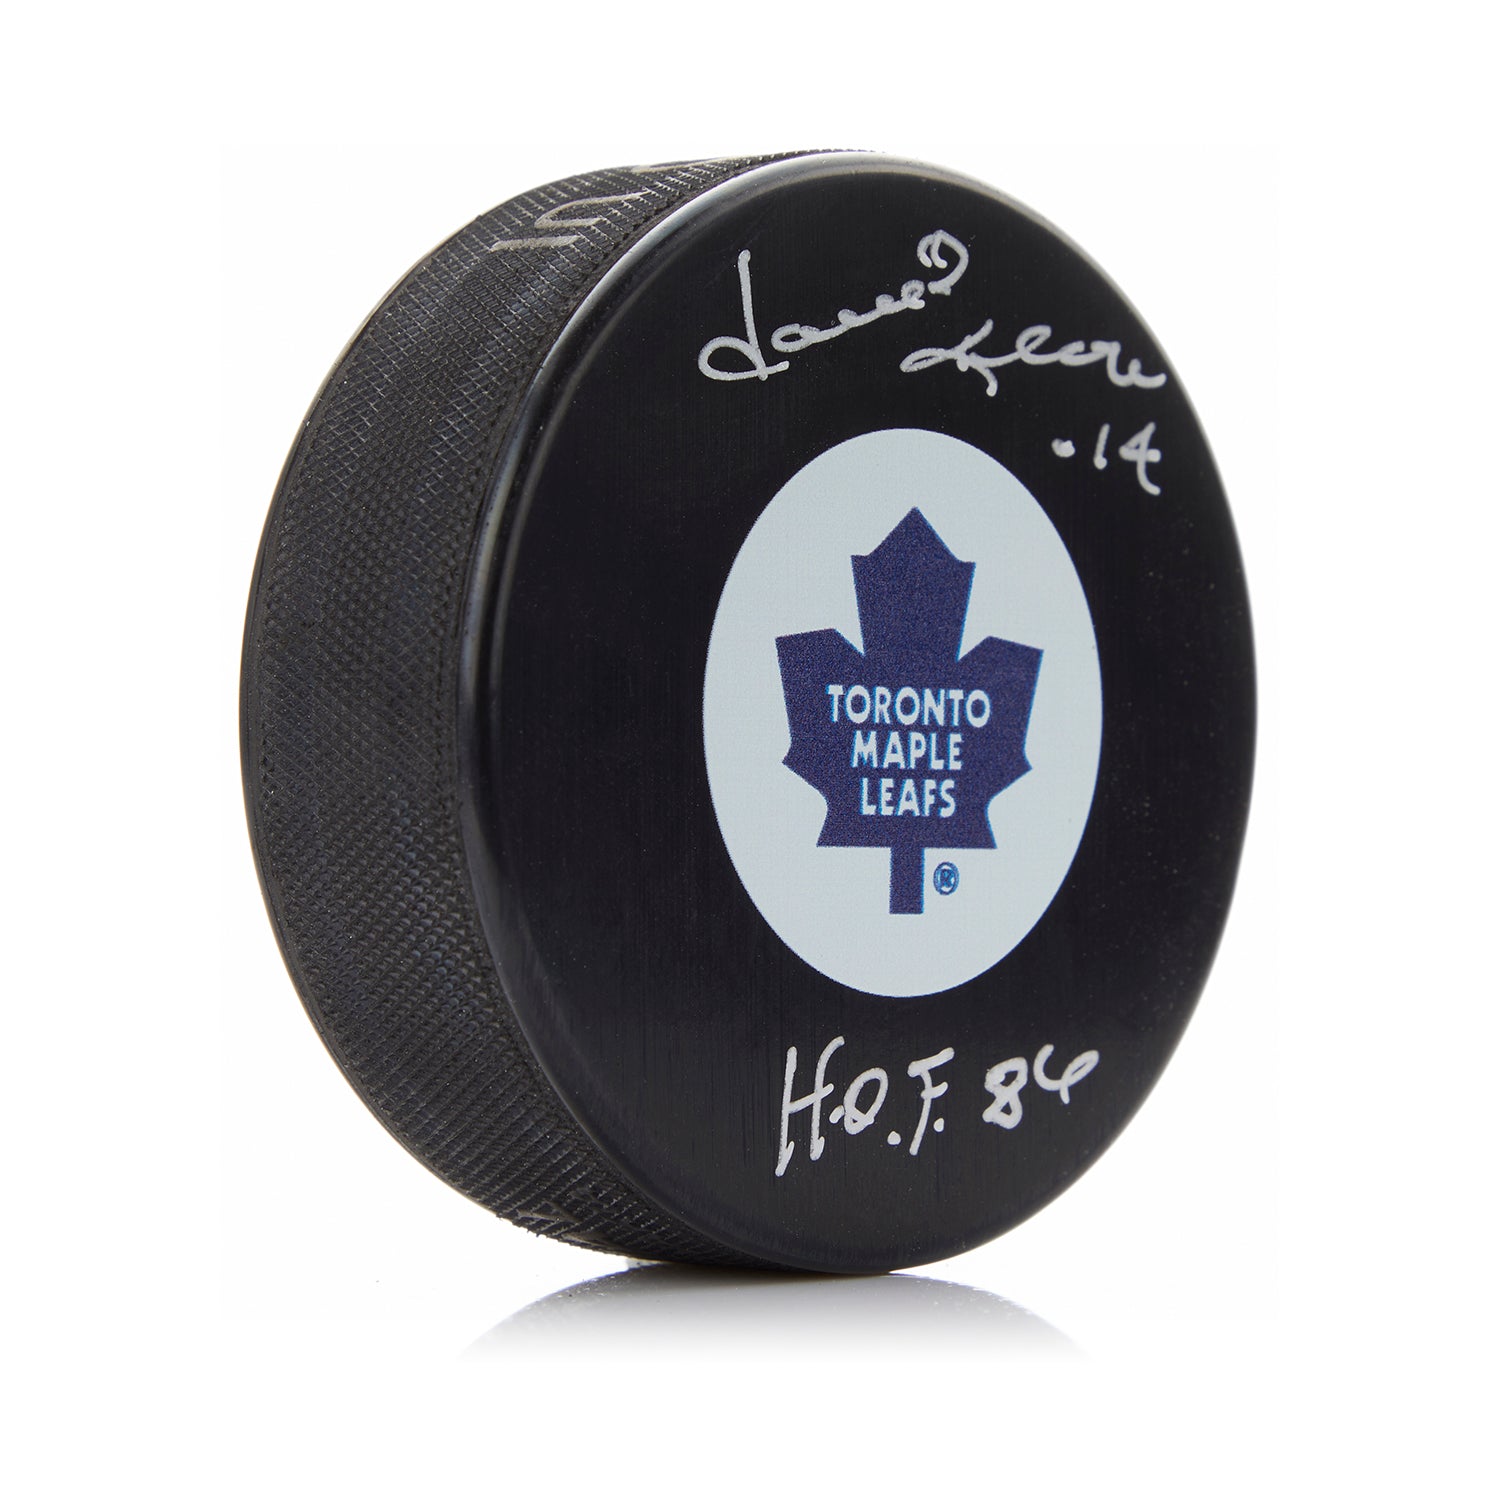 Dave Keon Signed Toronto Maple Leafs Puck with HOF Note